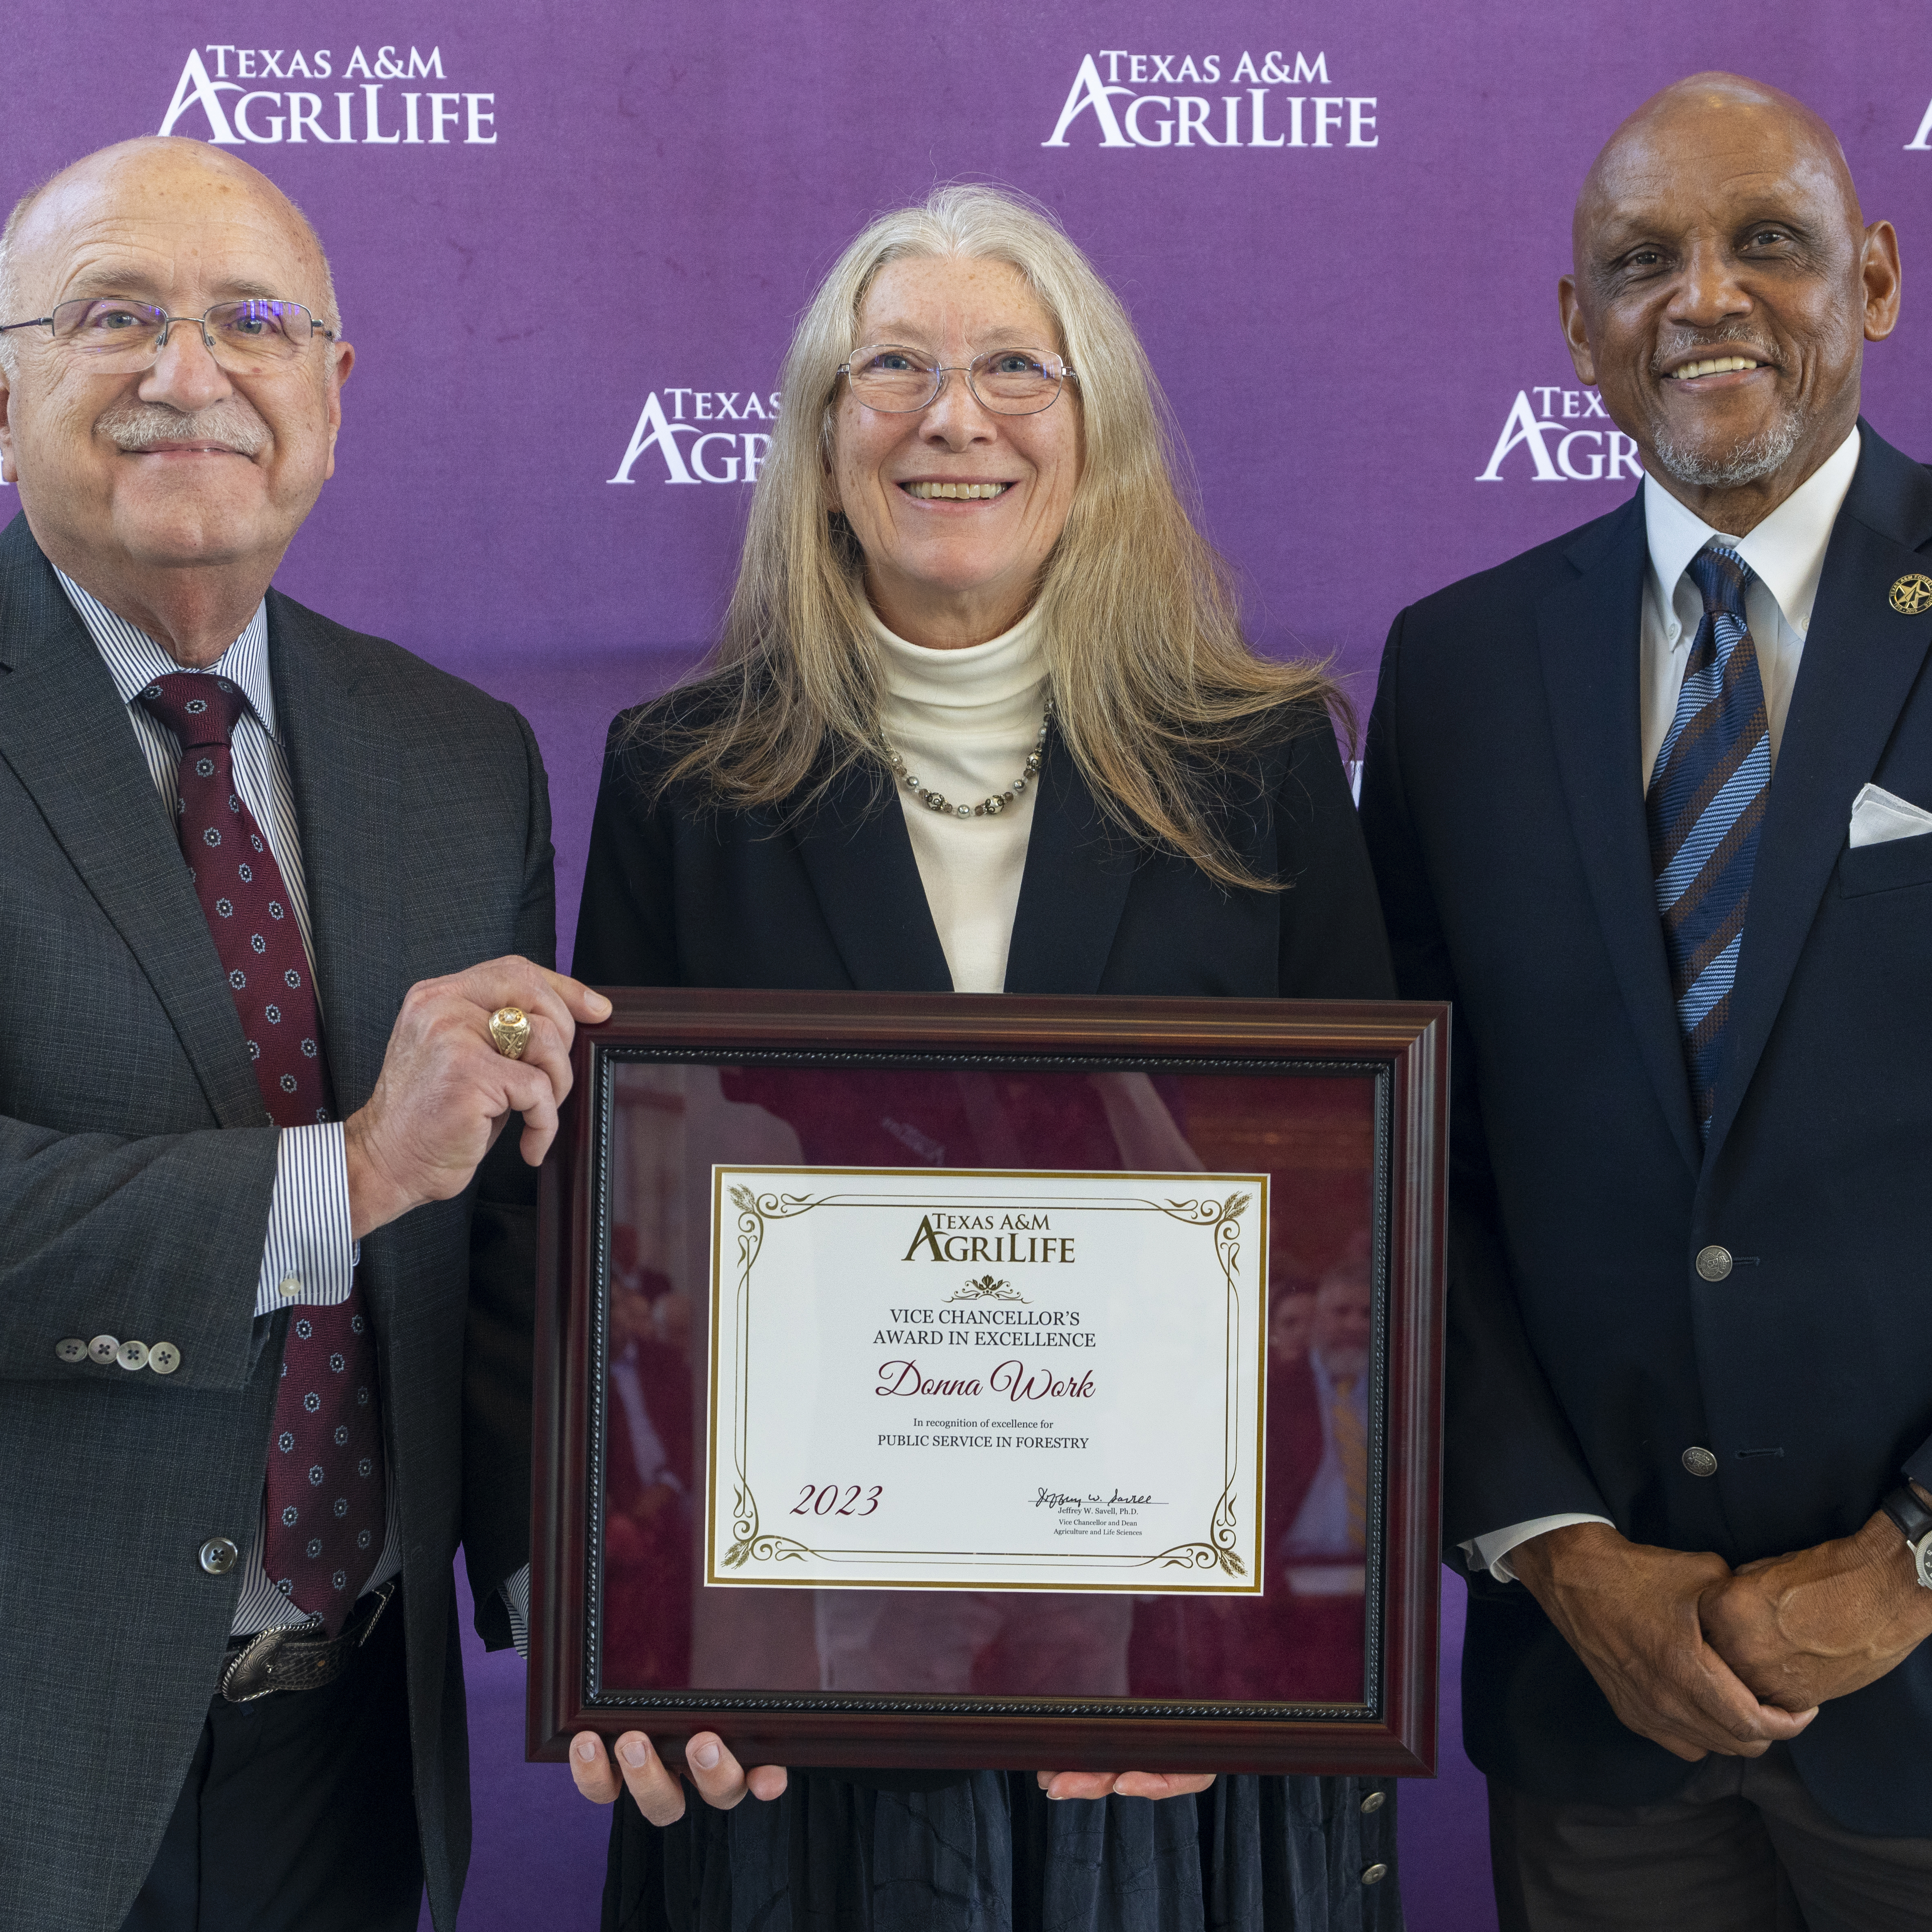 With 33 years of service with Texas A&M Forest Service and decades of leadership in red-cockaded woodpecker conservation efforts in East Texas, Donna Work was awarded the Vice Chancellor’s Award in Excellence for her public service in forestry.